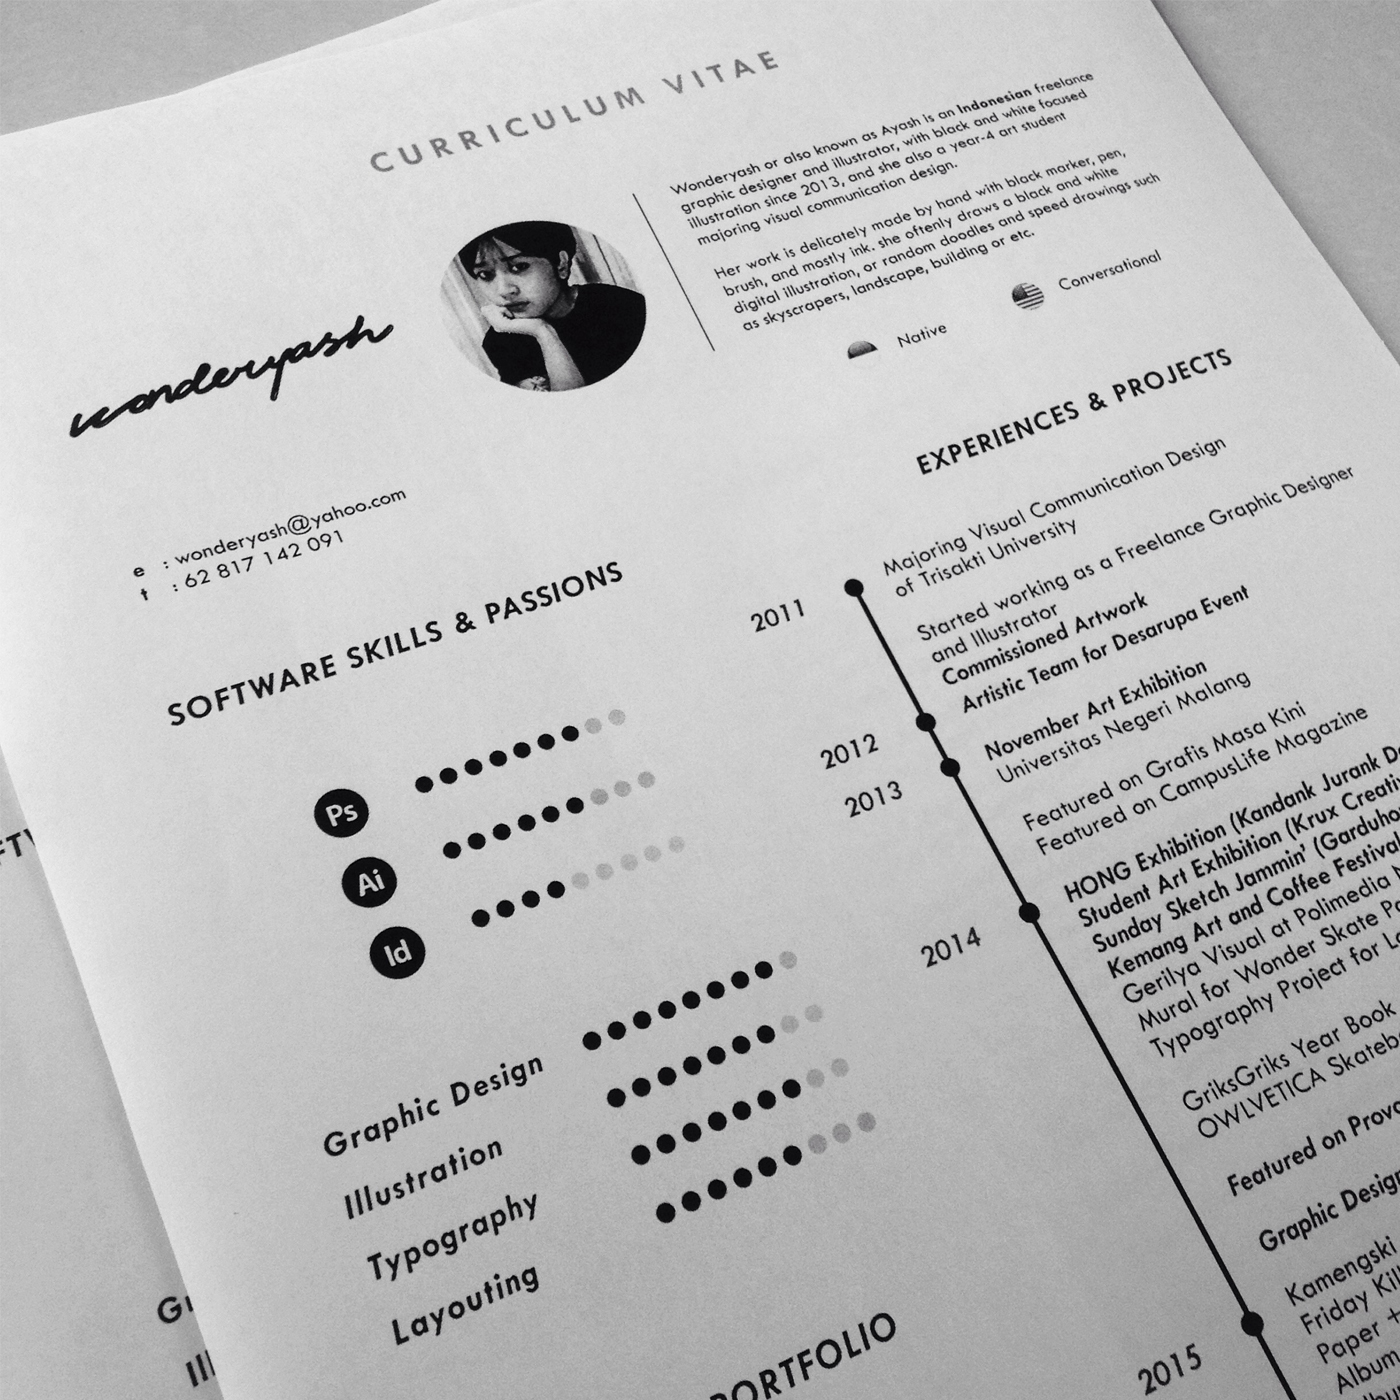 Curriculum Vitae Template Available For Download On Behance